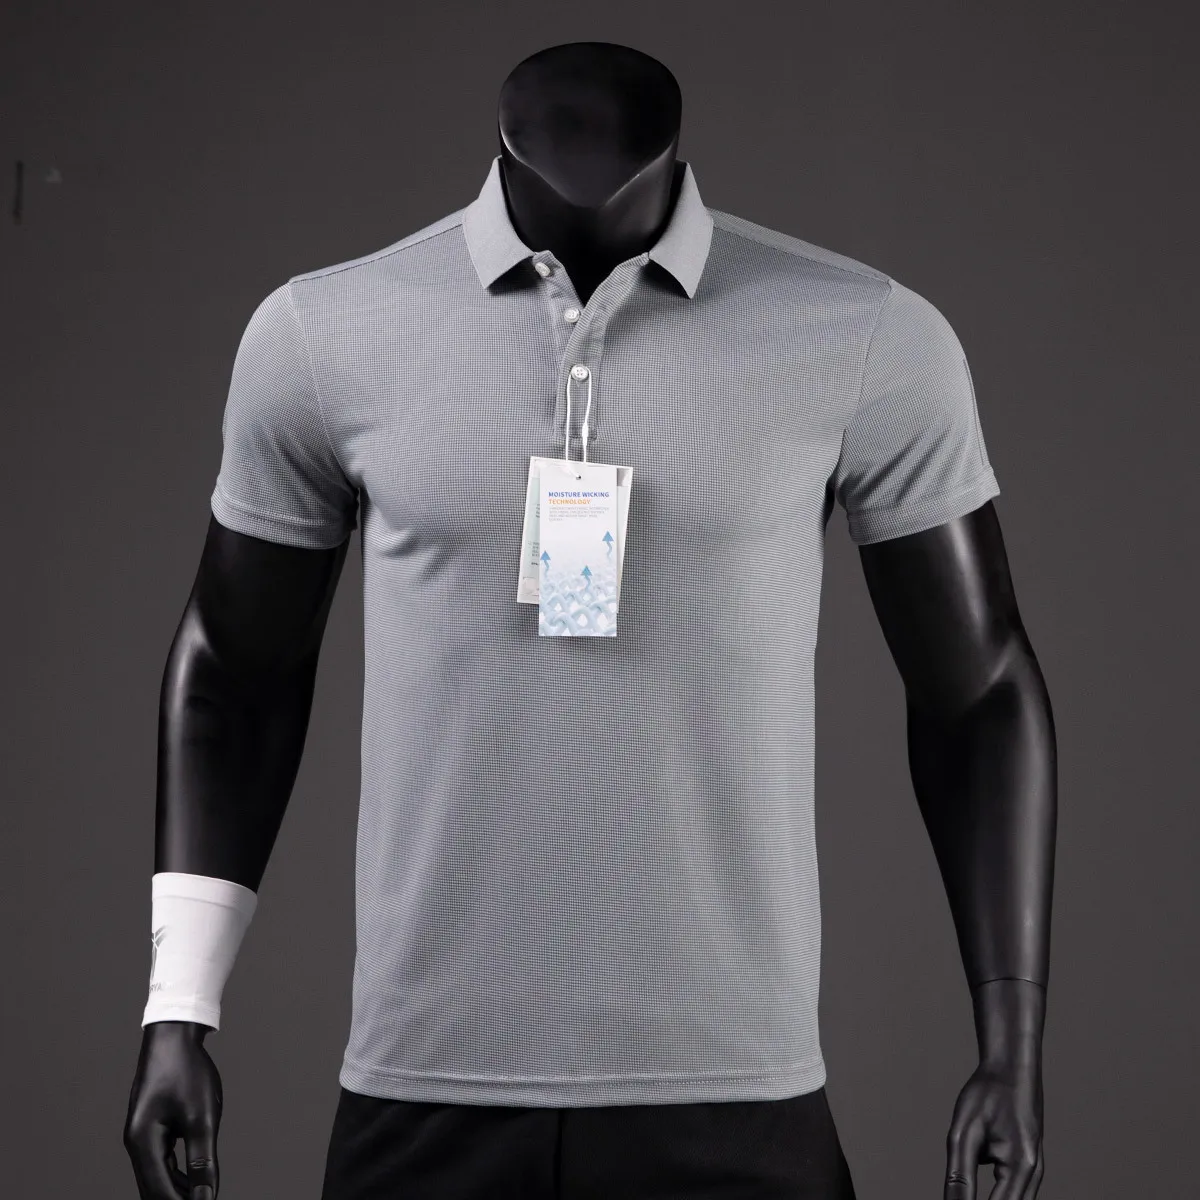 Men's Golf Shirt Luxury Functional Polo Shirt Quick-drying Perspiration Breathable Lapel Short-sleeved T-shirt for Man Summer 8